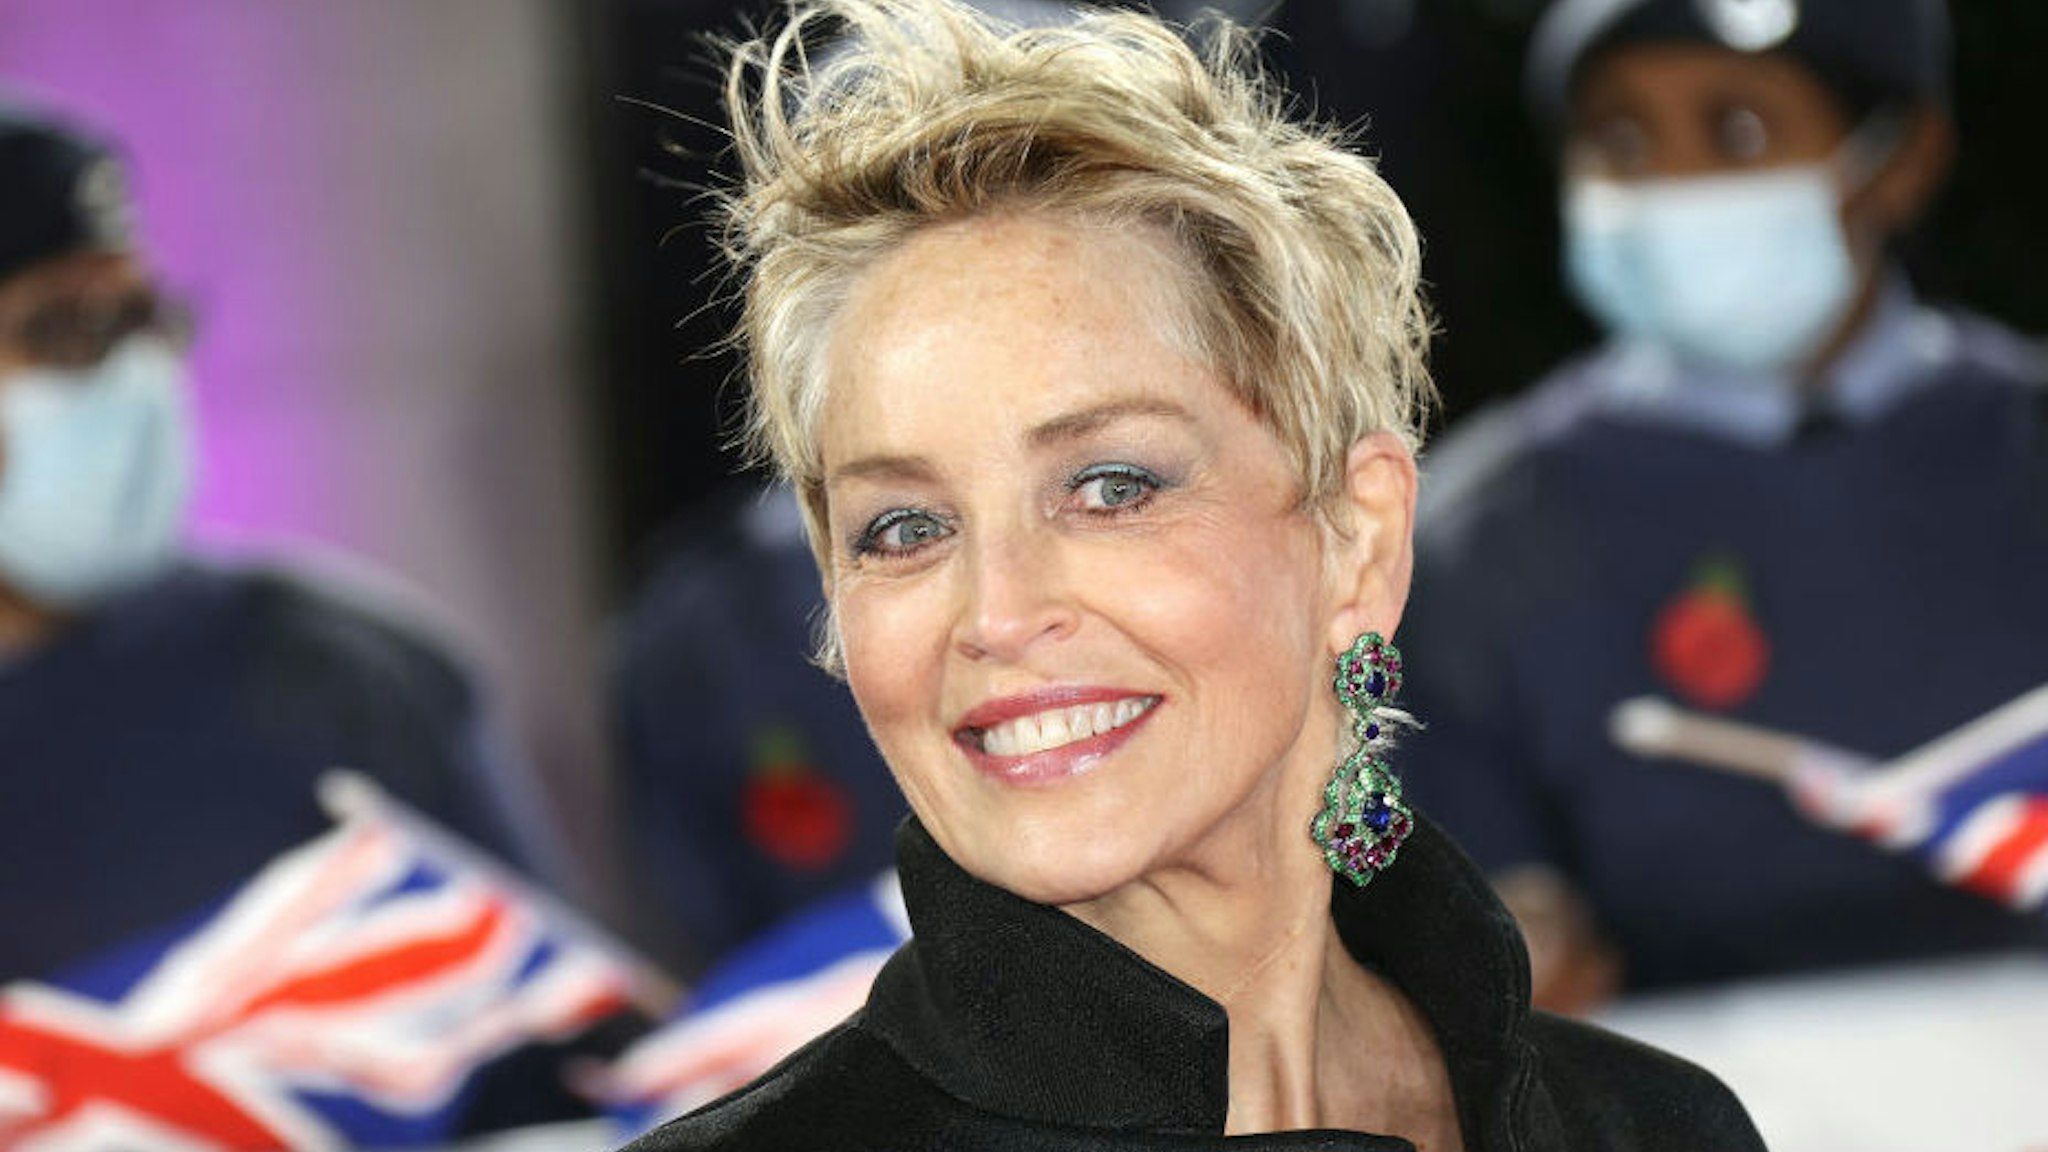 Sharon Stone attends the Pride Of Britain Awards 2021 at The Grosvenor House Hotel on October 30, 2021 in London, England.